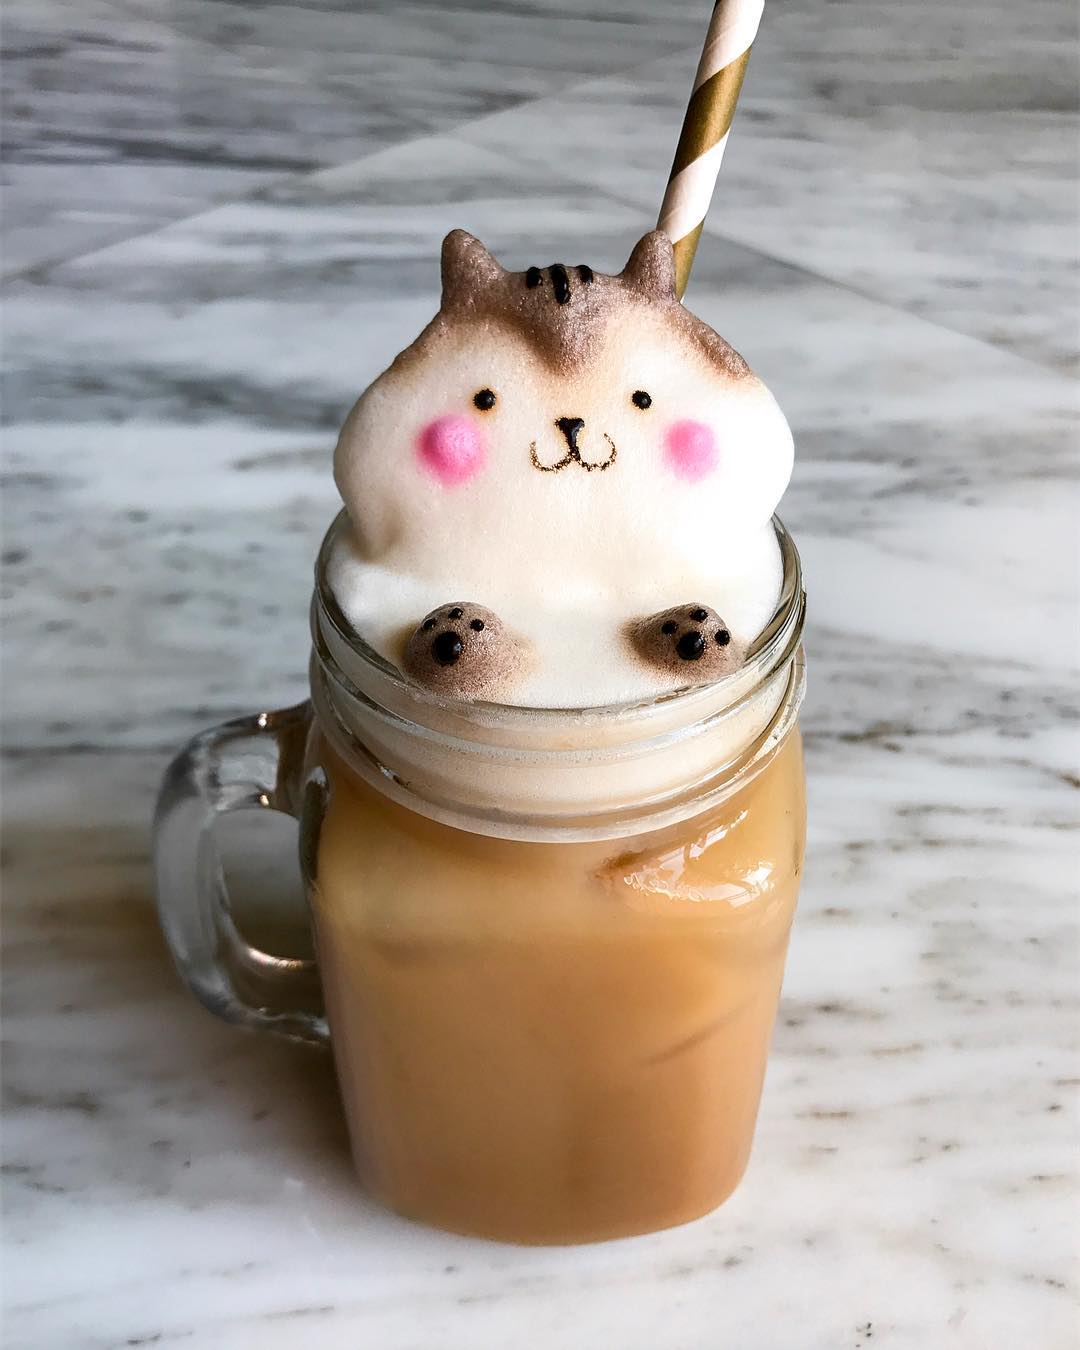 Self-Taught Latte Artist Daphne Tan Whips Up Adorable 3D Coffee Art